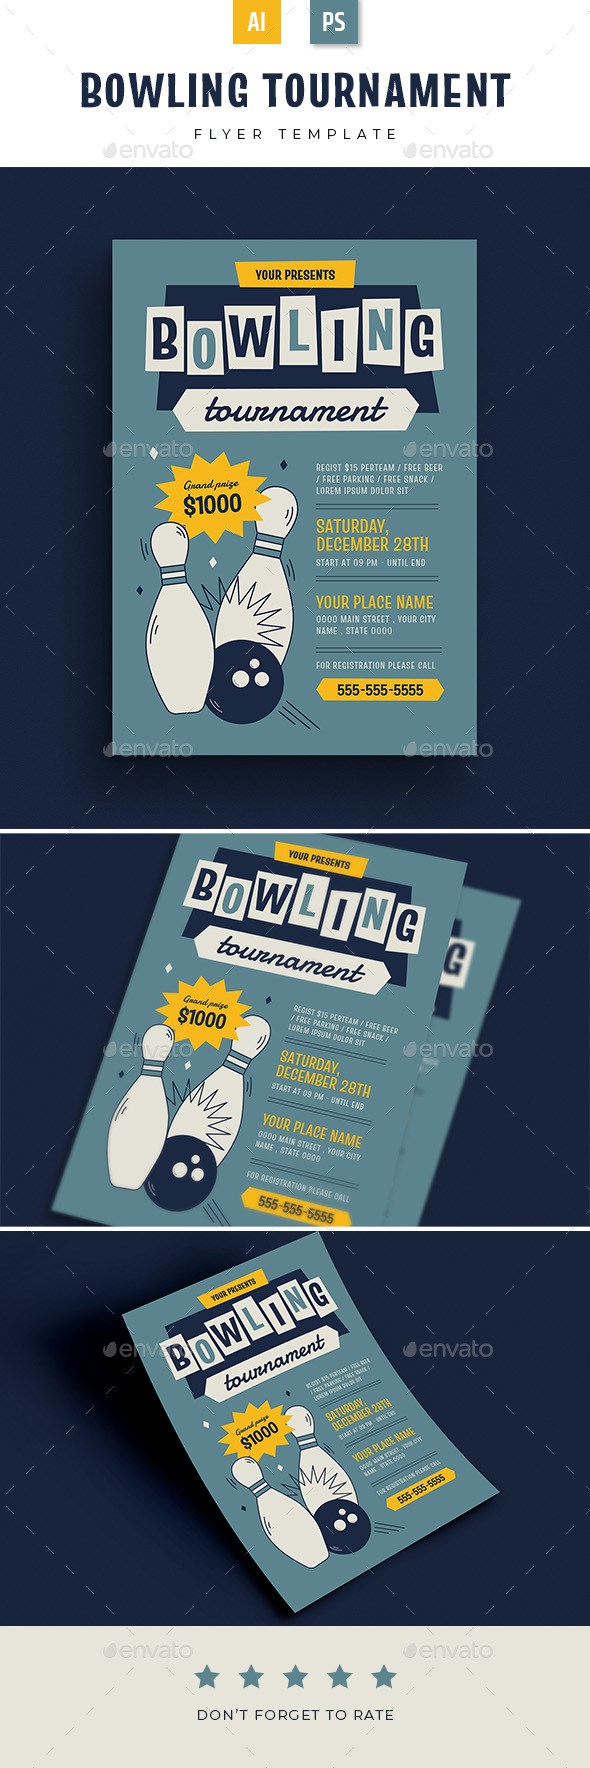 [DOWNLOAD]Bowling Tournament Flyer Template